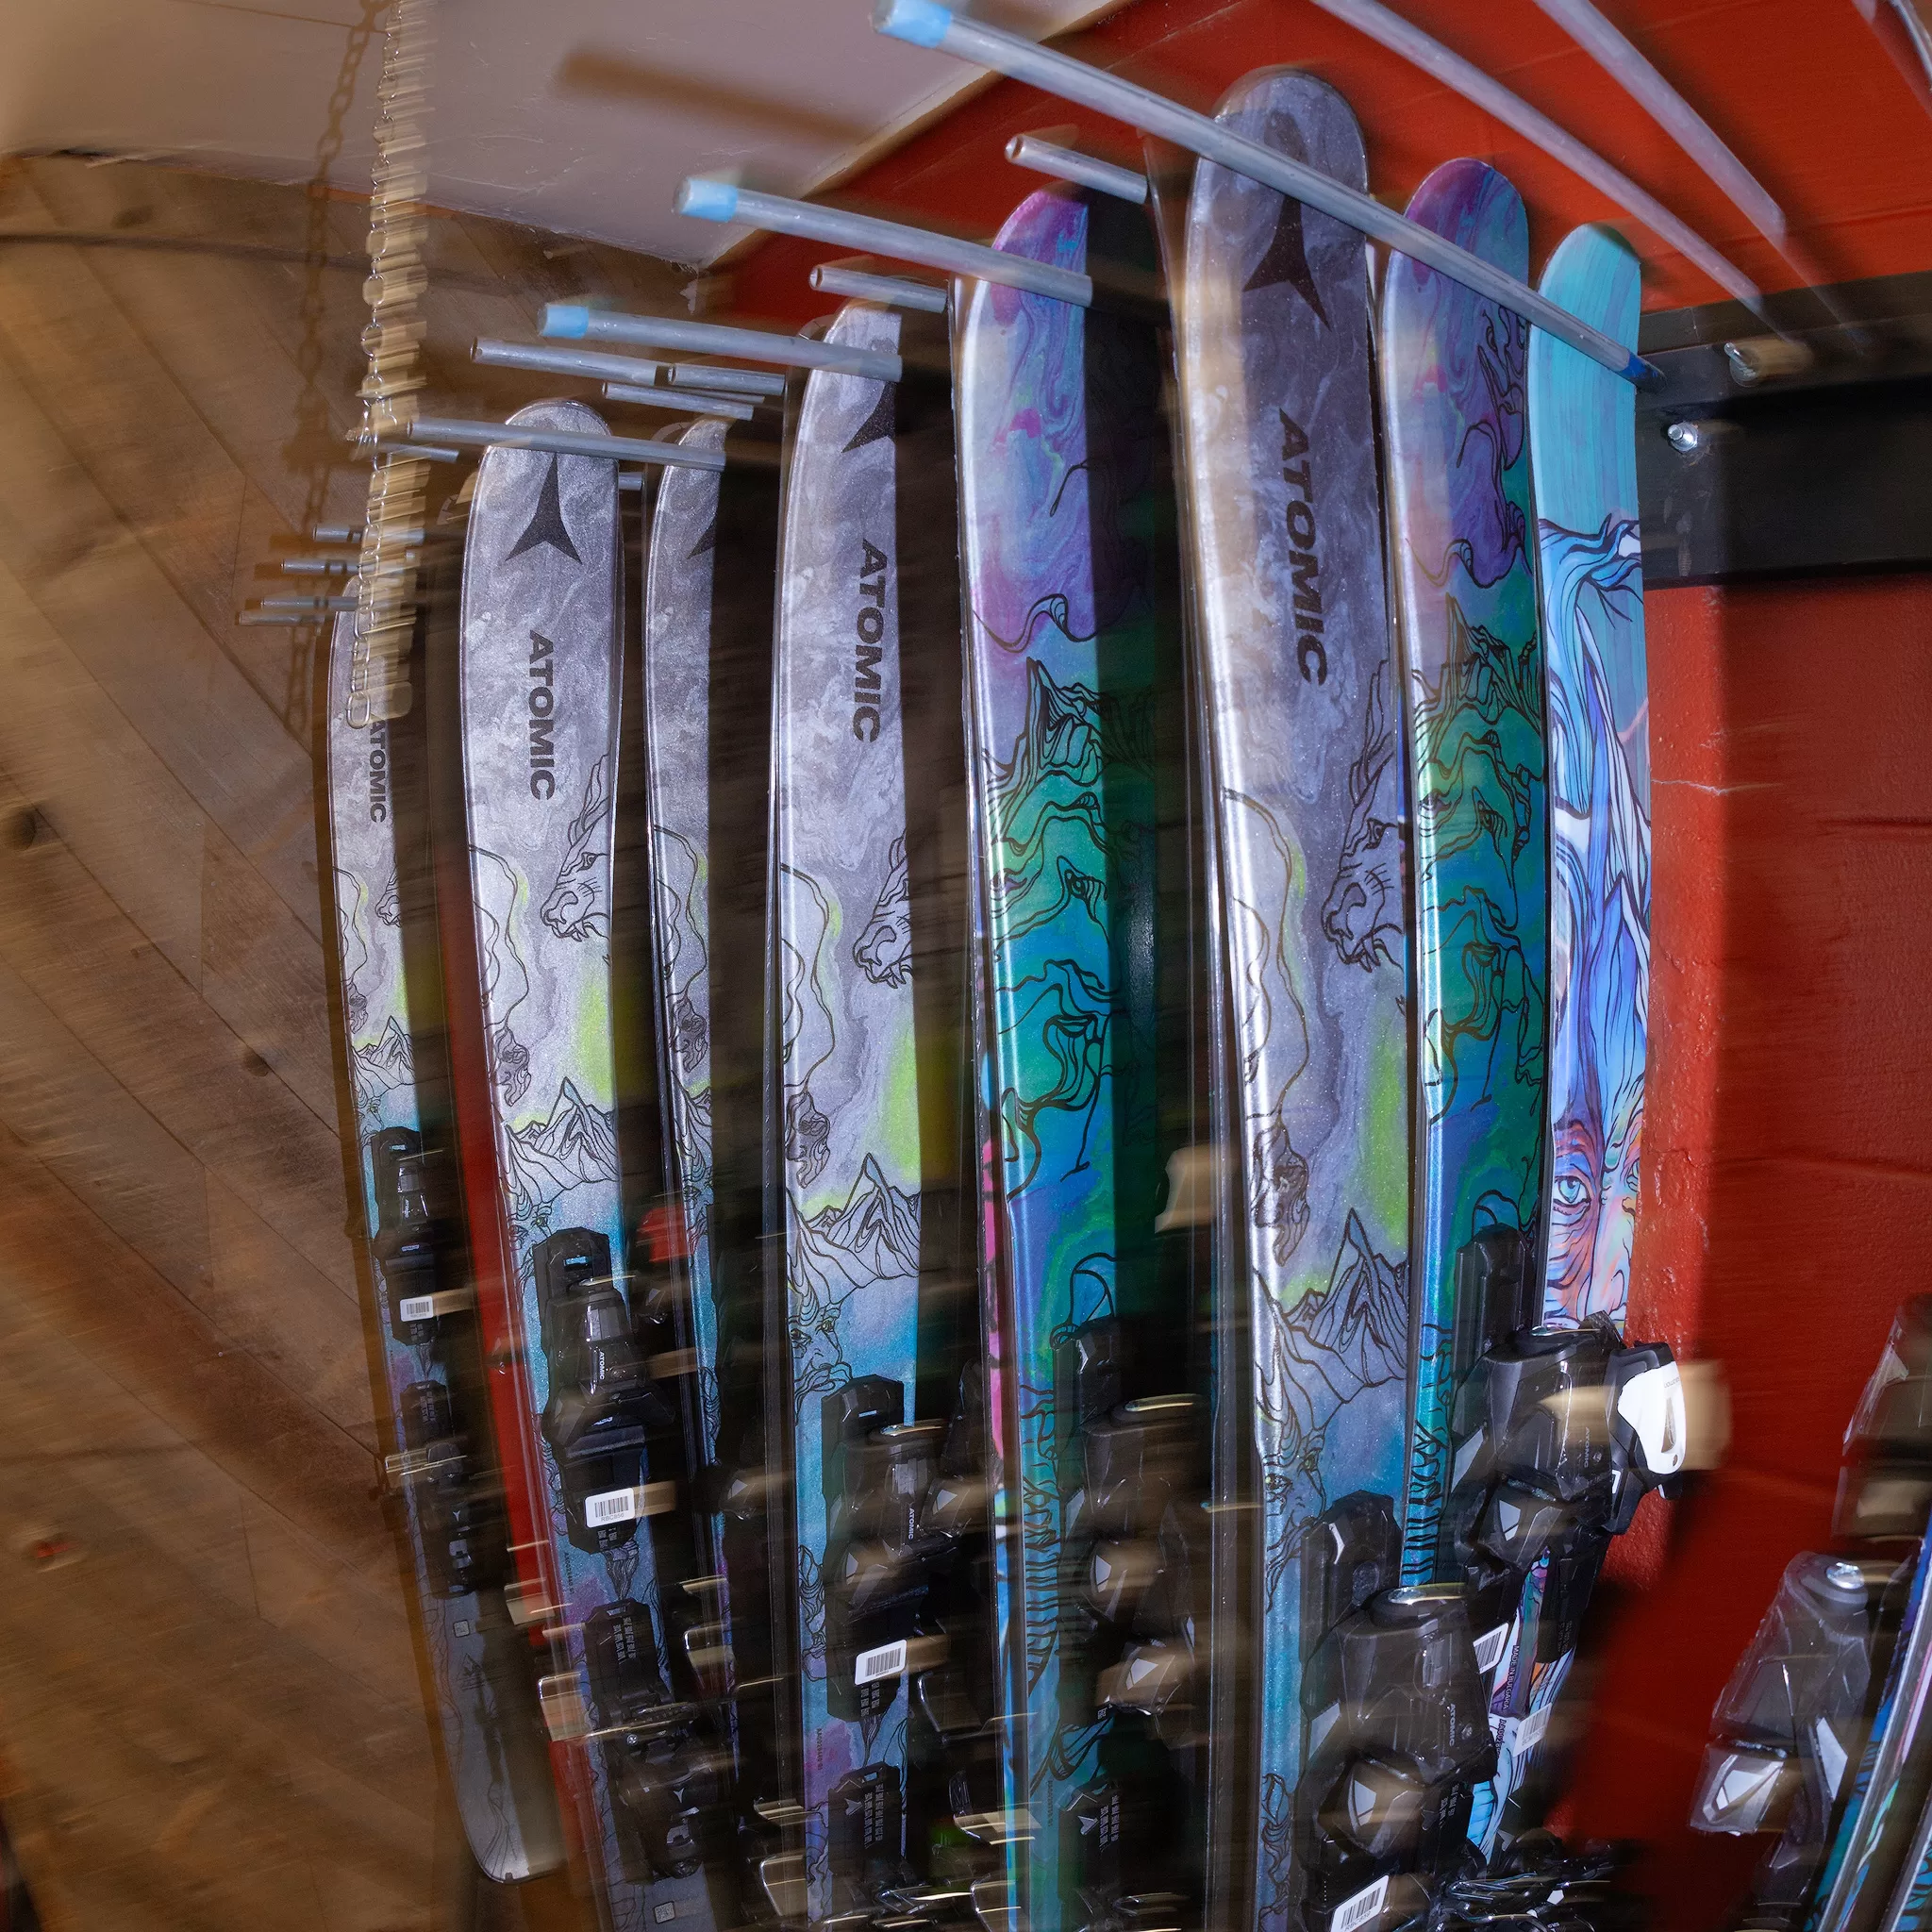 Lease skis in Boise at Eco Lounge